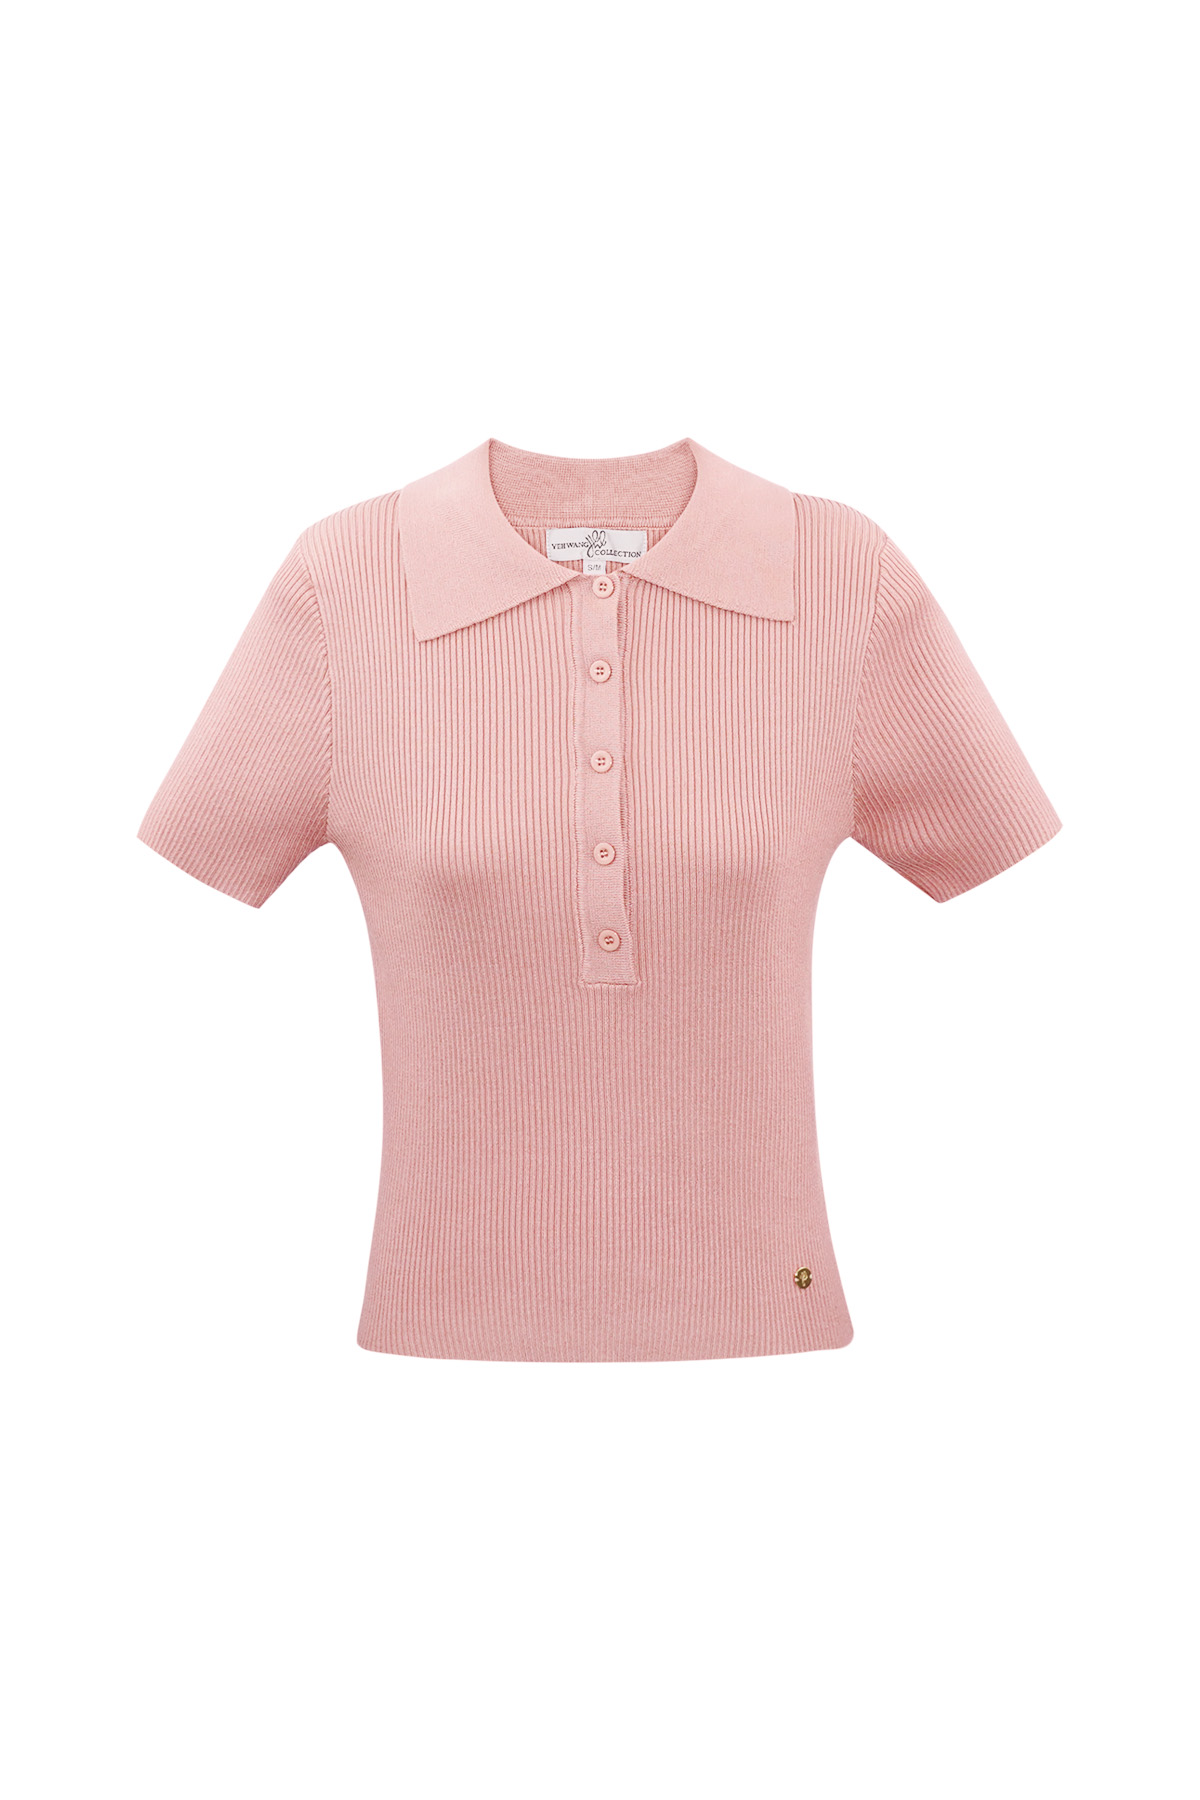 Basic polo half button up large/extra large – pink